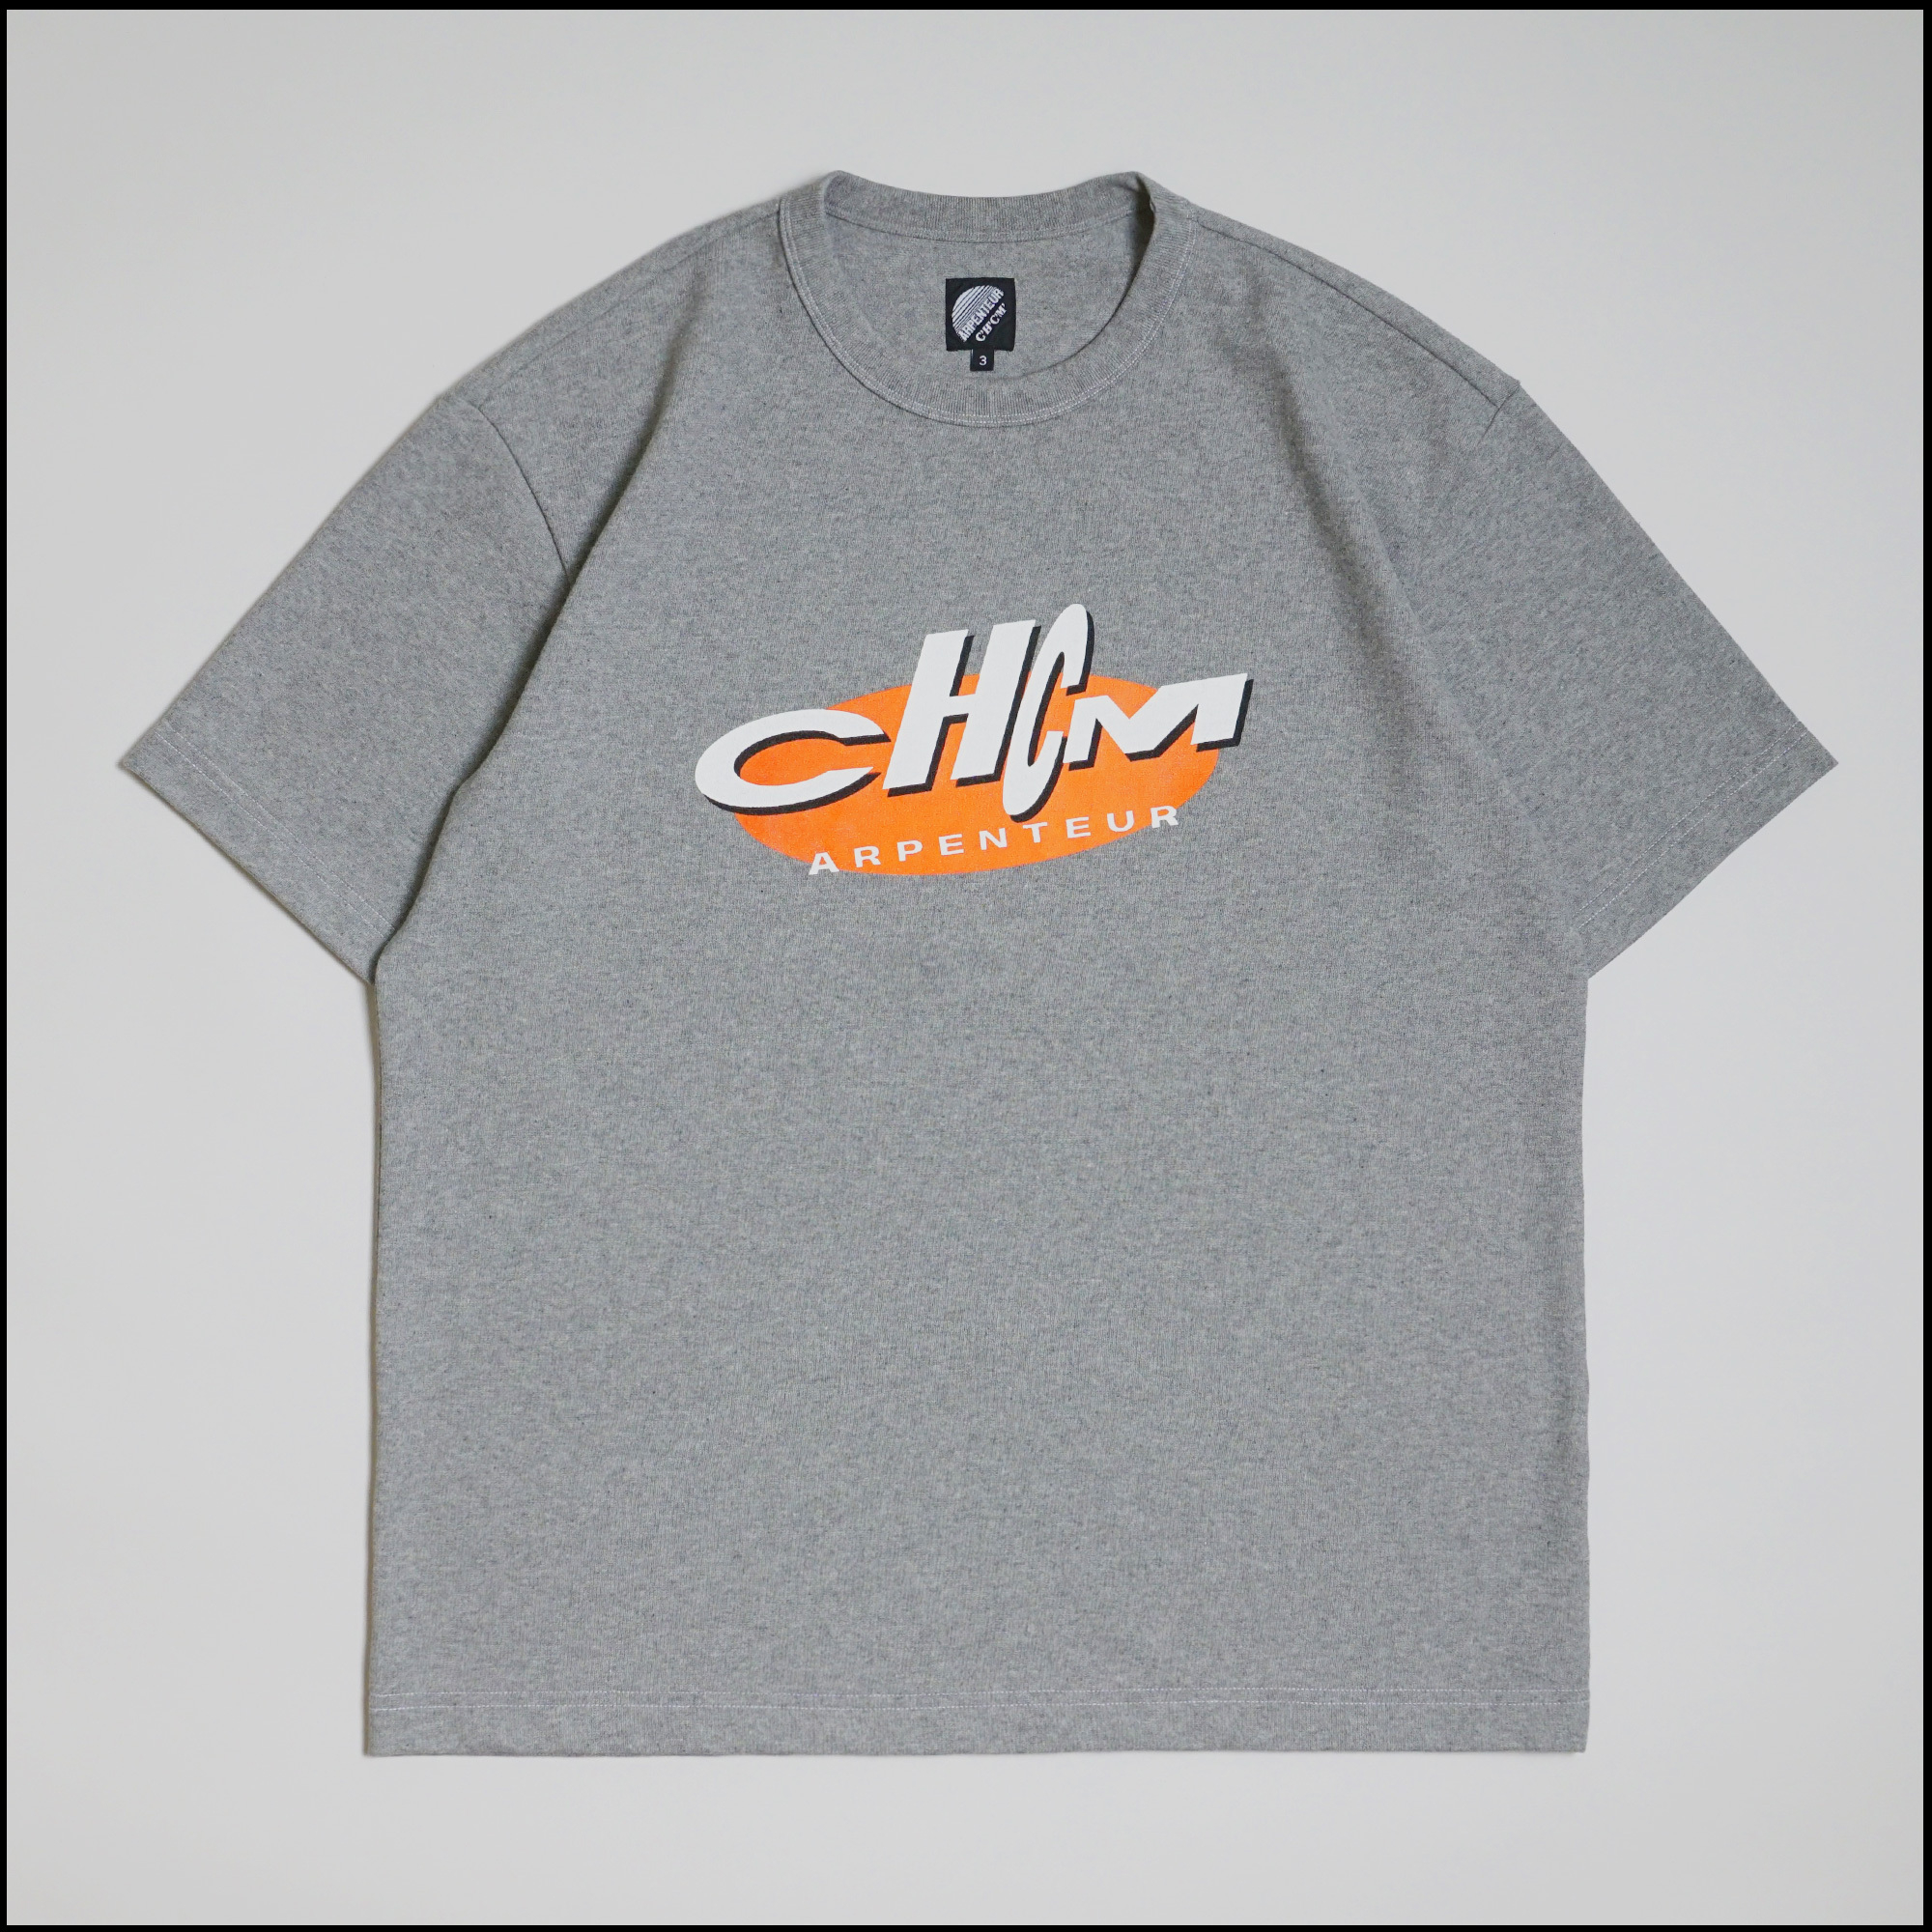 Day Tee in Grey mix color by Arpenteur for C'H'C'M'